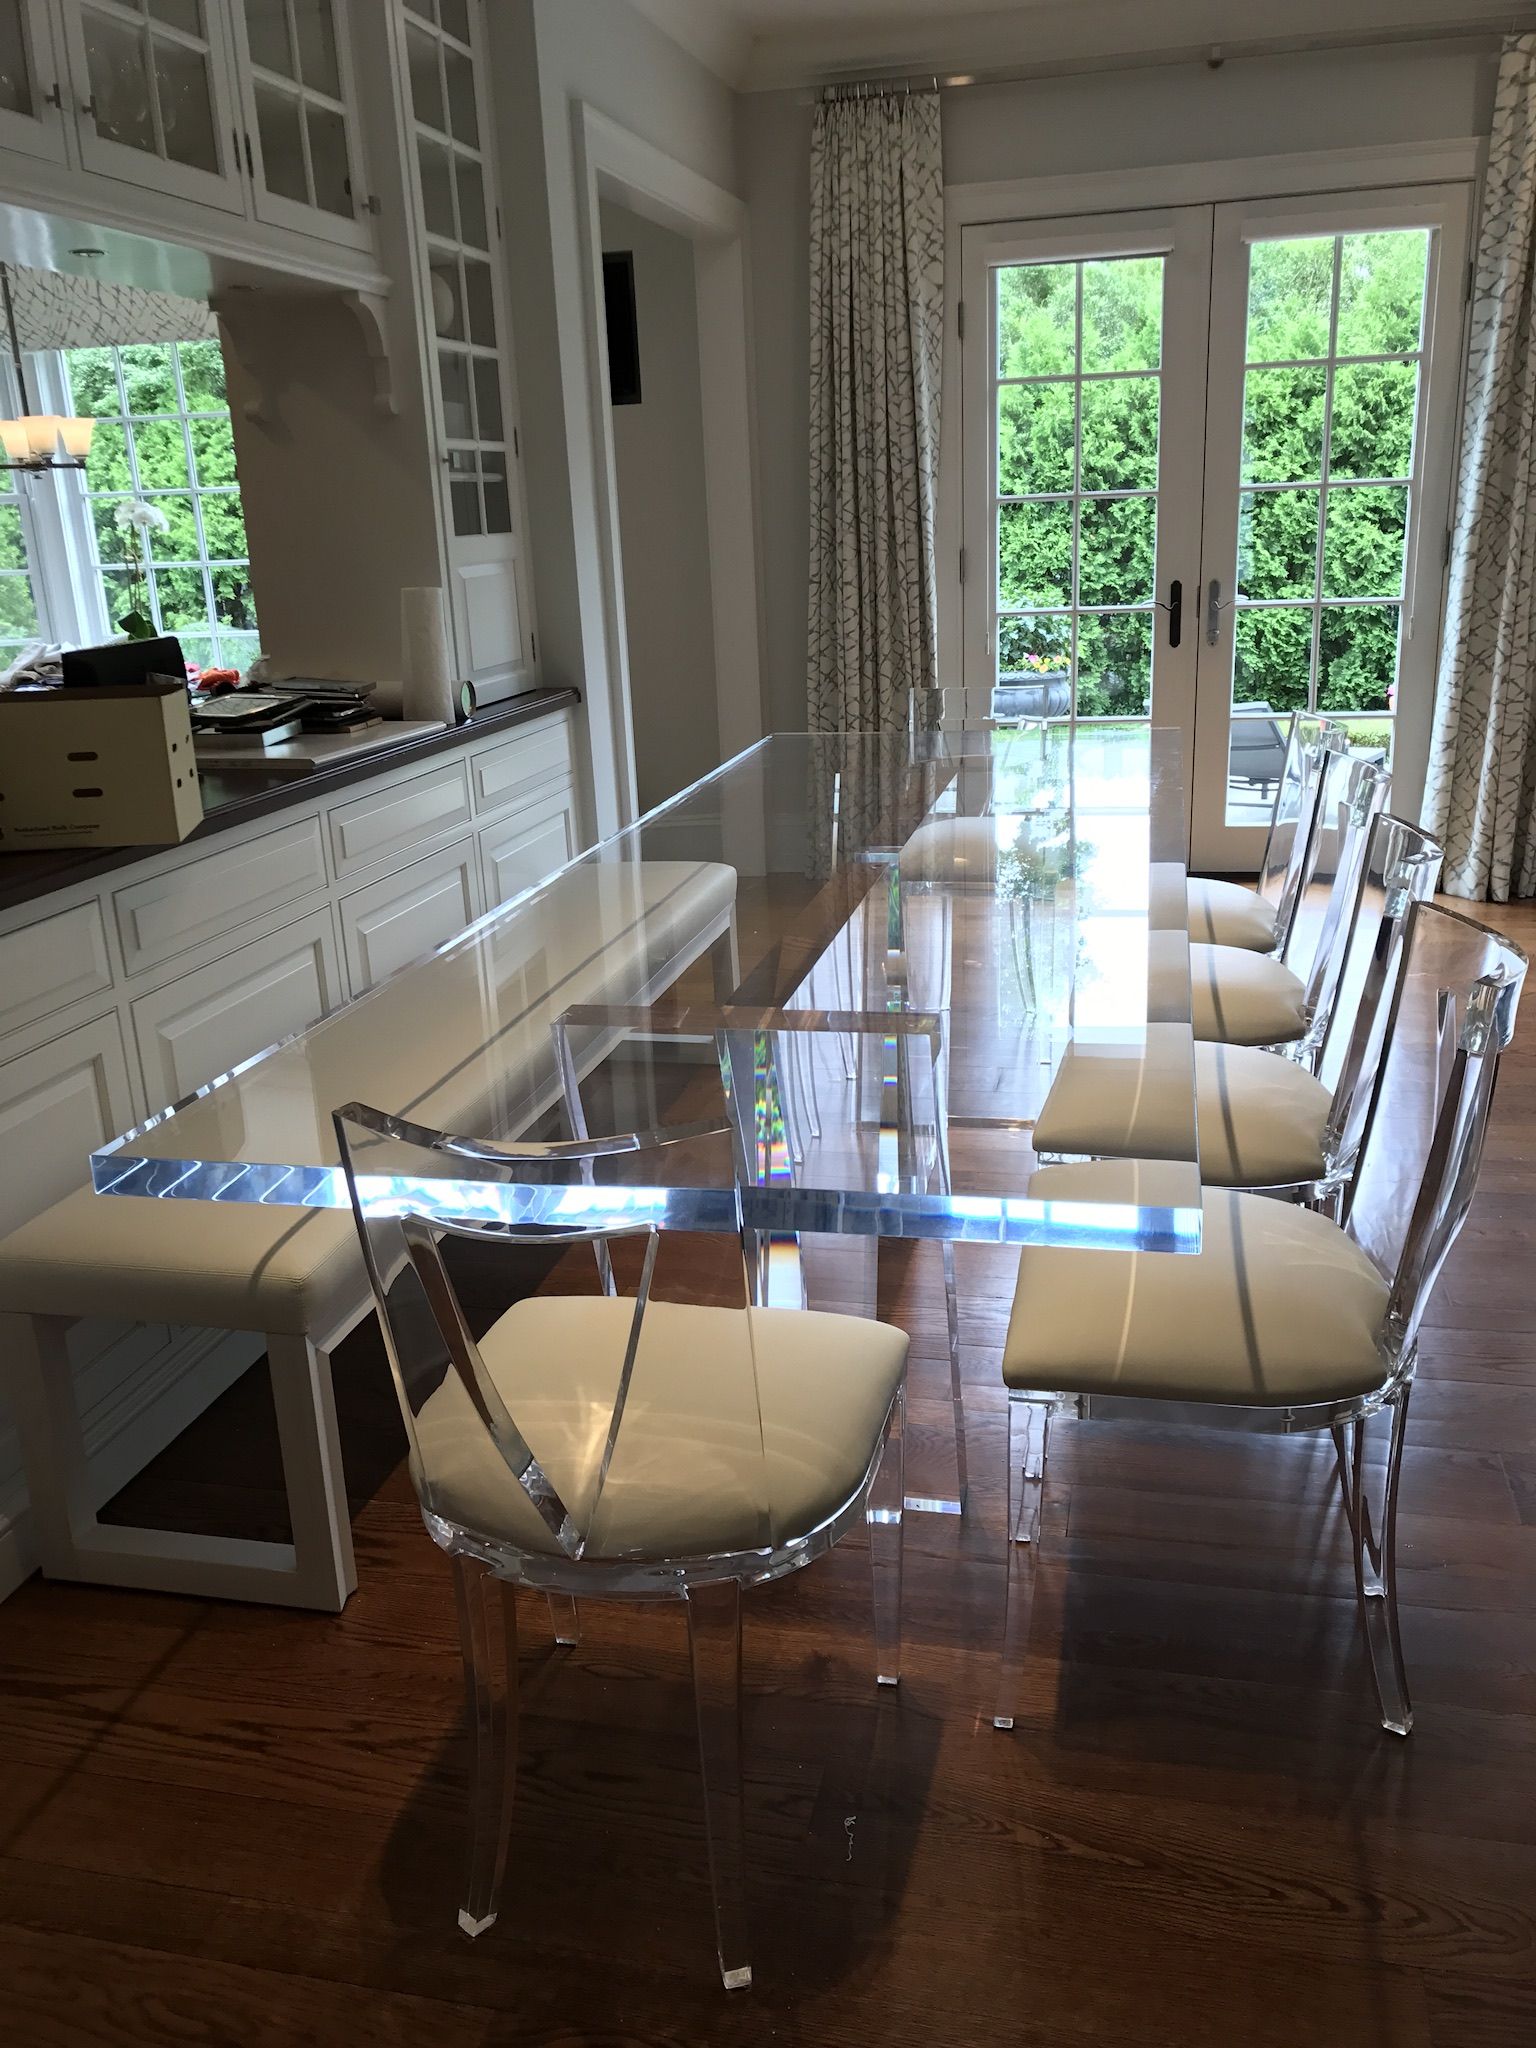 acrylic dining table and chairs